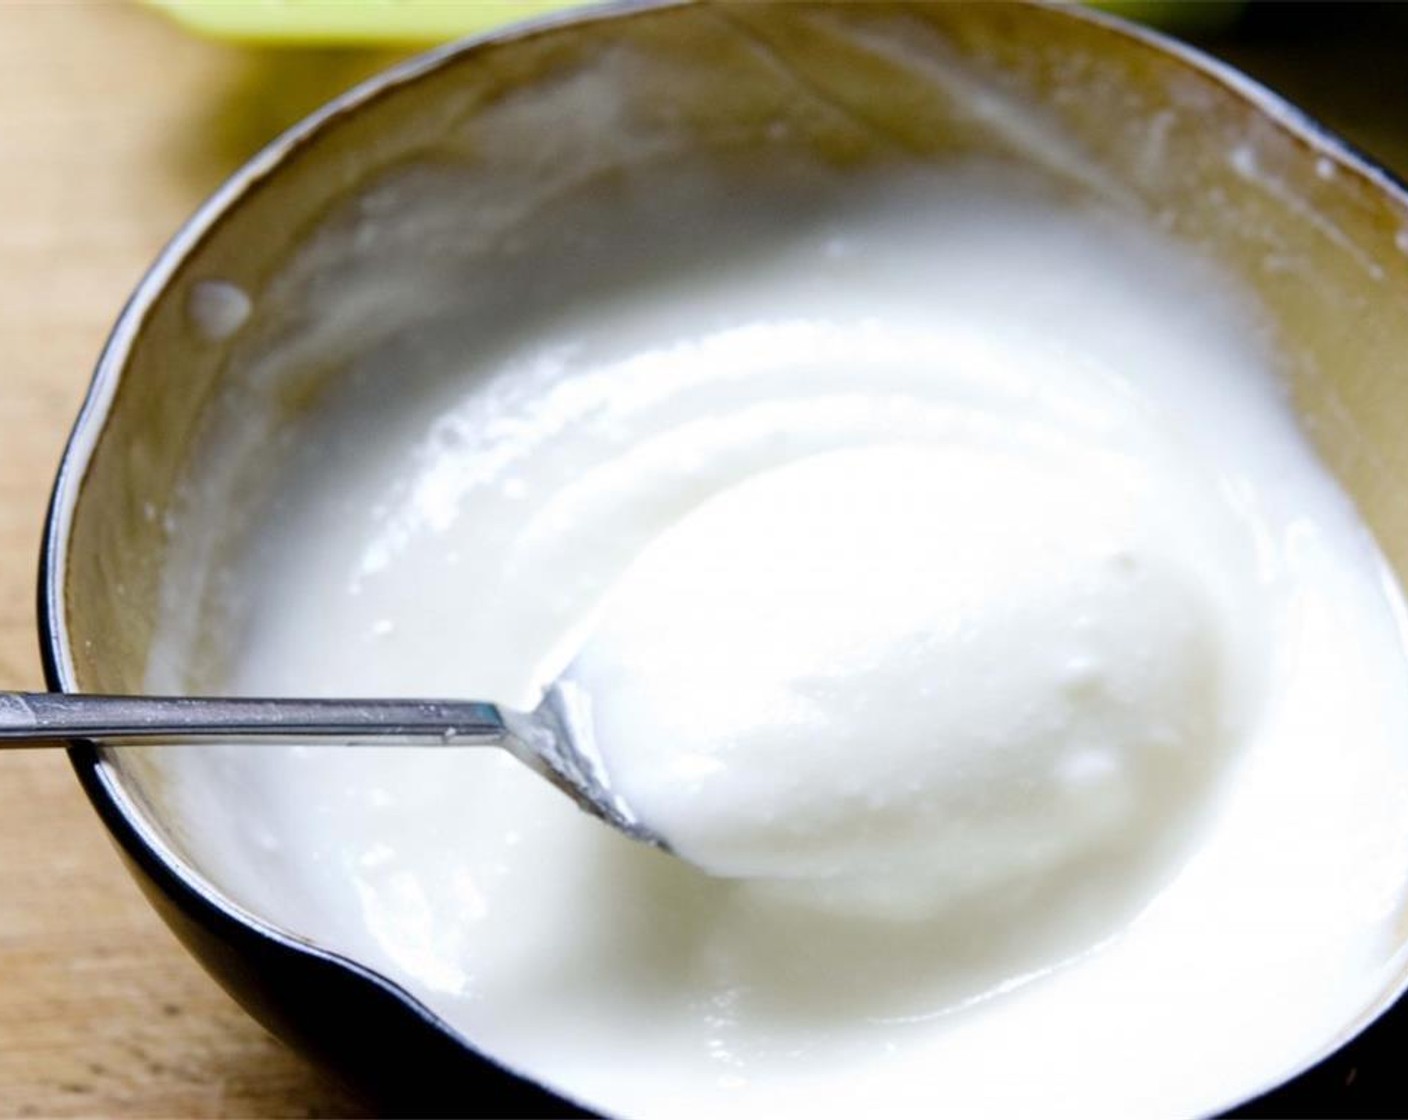 step 3 In a separate bowl, combine Fat-Free Greek Yogurt (1/3 cup) with the other half of the Honey (1 Tbsp), stir well.